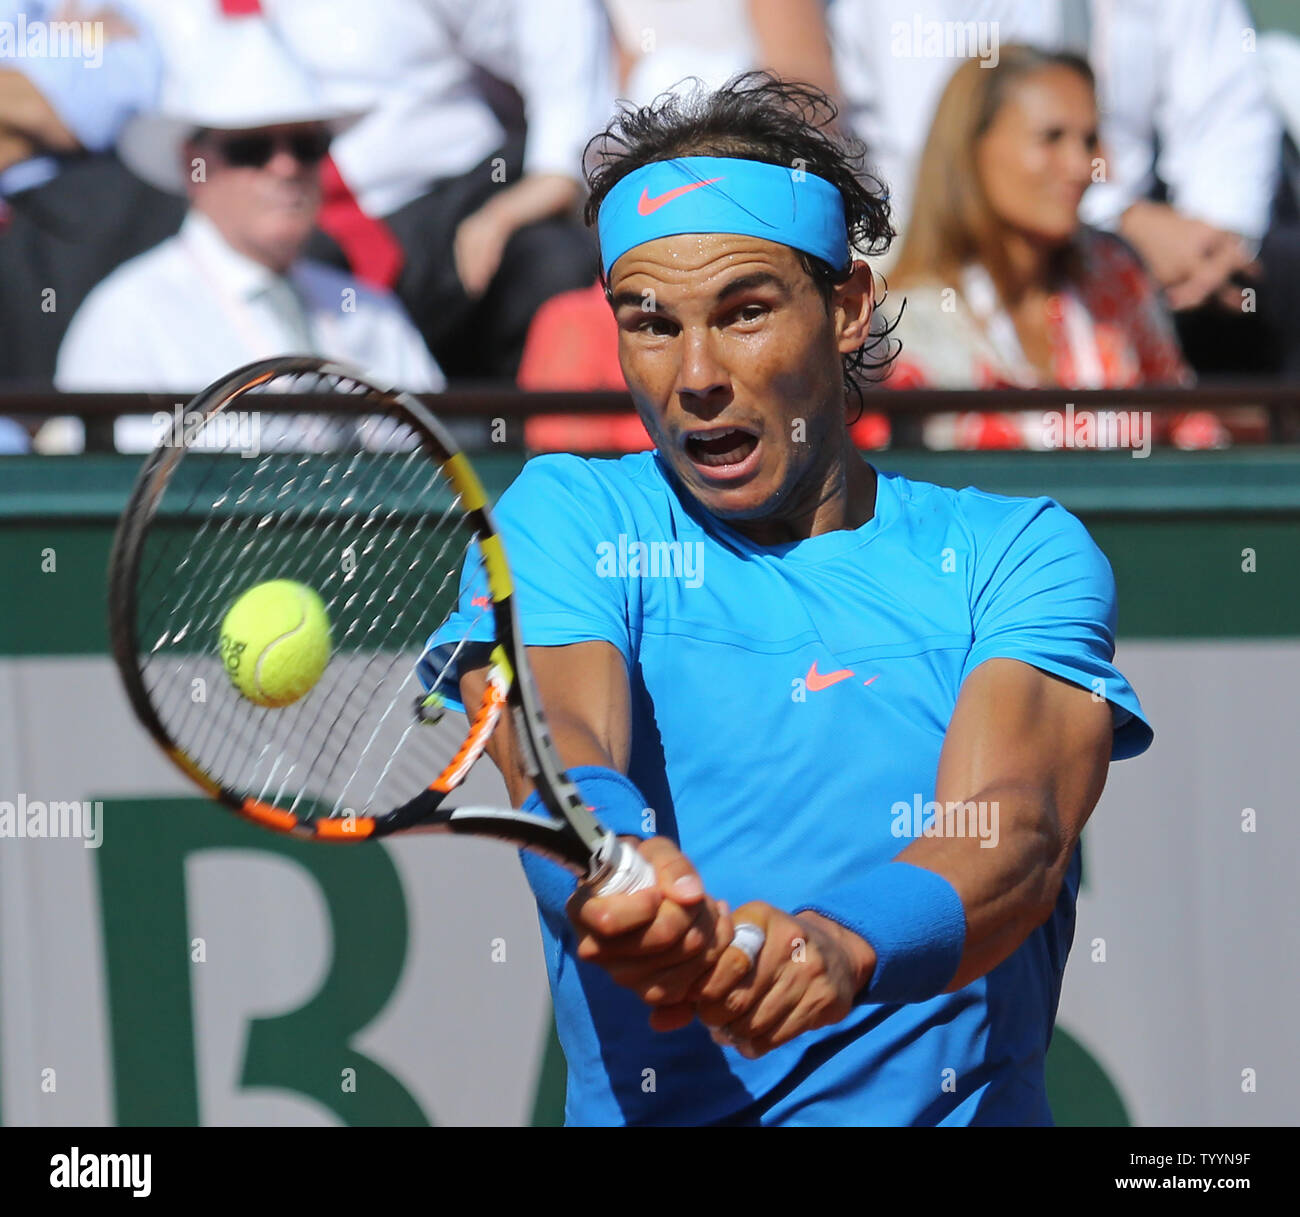 Rafael Nadal of Spain hits a shot during his French Open men's quarterfinal  match against Novak Djokovic of Serbia at Roland Garros in Paris on June 3,  2015. Djokovic defeated Nadal 7-5,